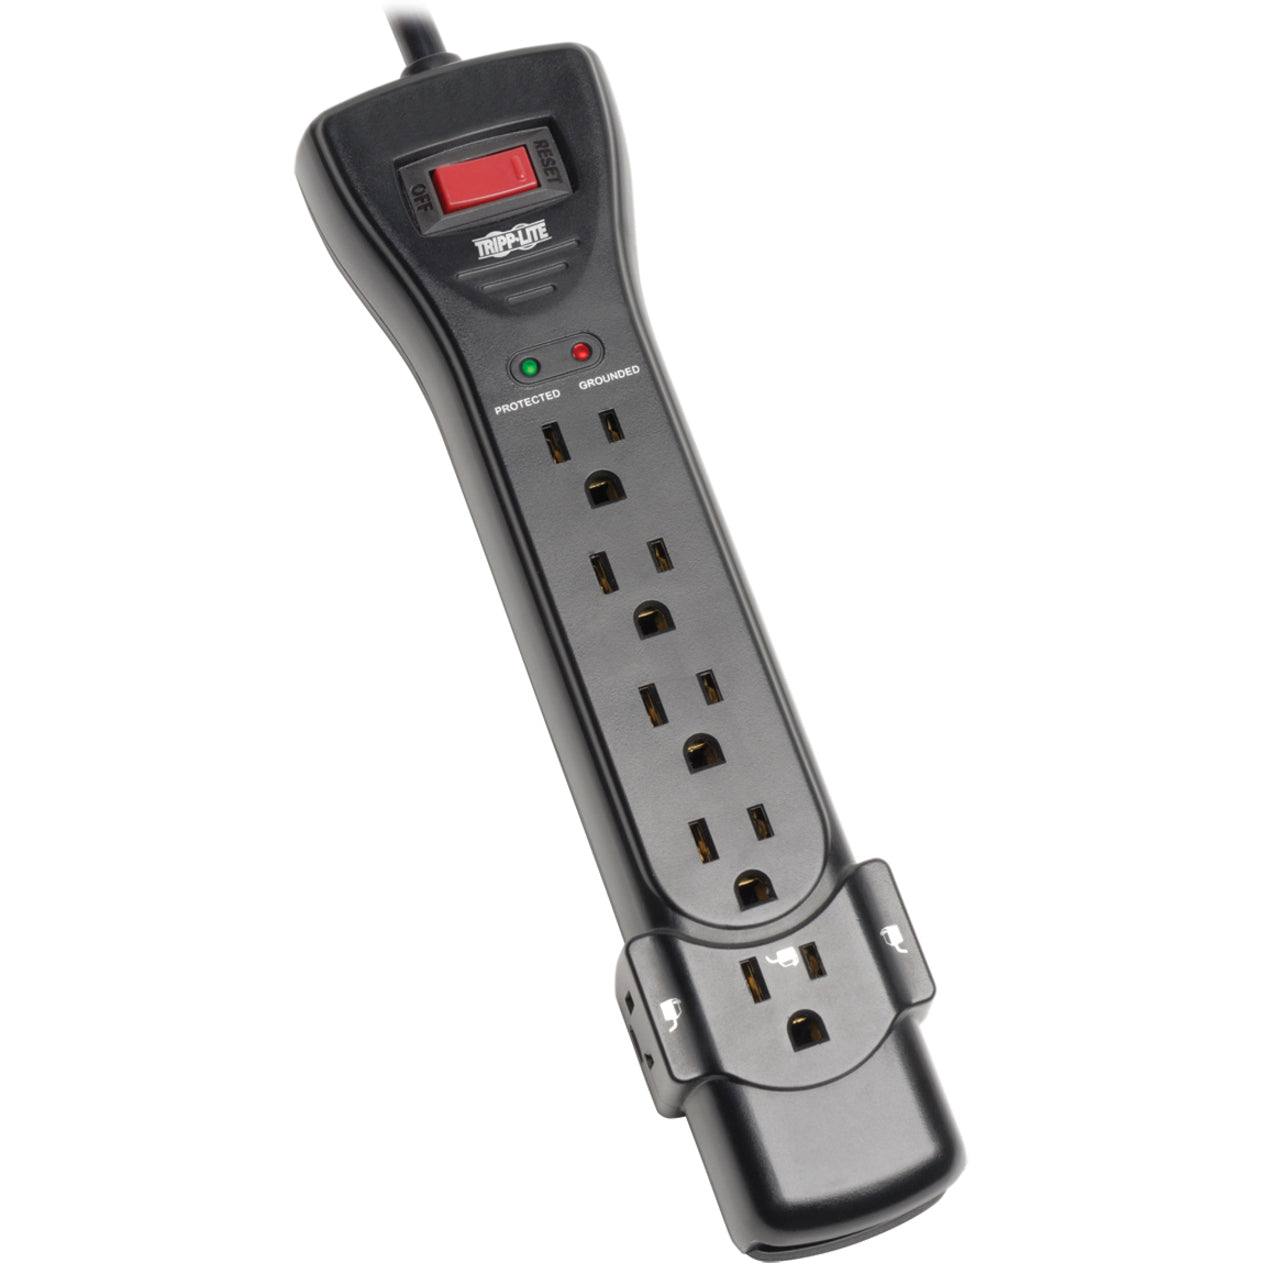 Tripp Lite Protect It! 7-Outlet Surge Protector 7 ft. Cord with Right-Angle Plug 2160 Joules Diagnostic LEDs Black Housing